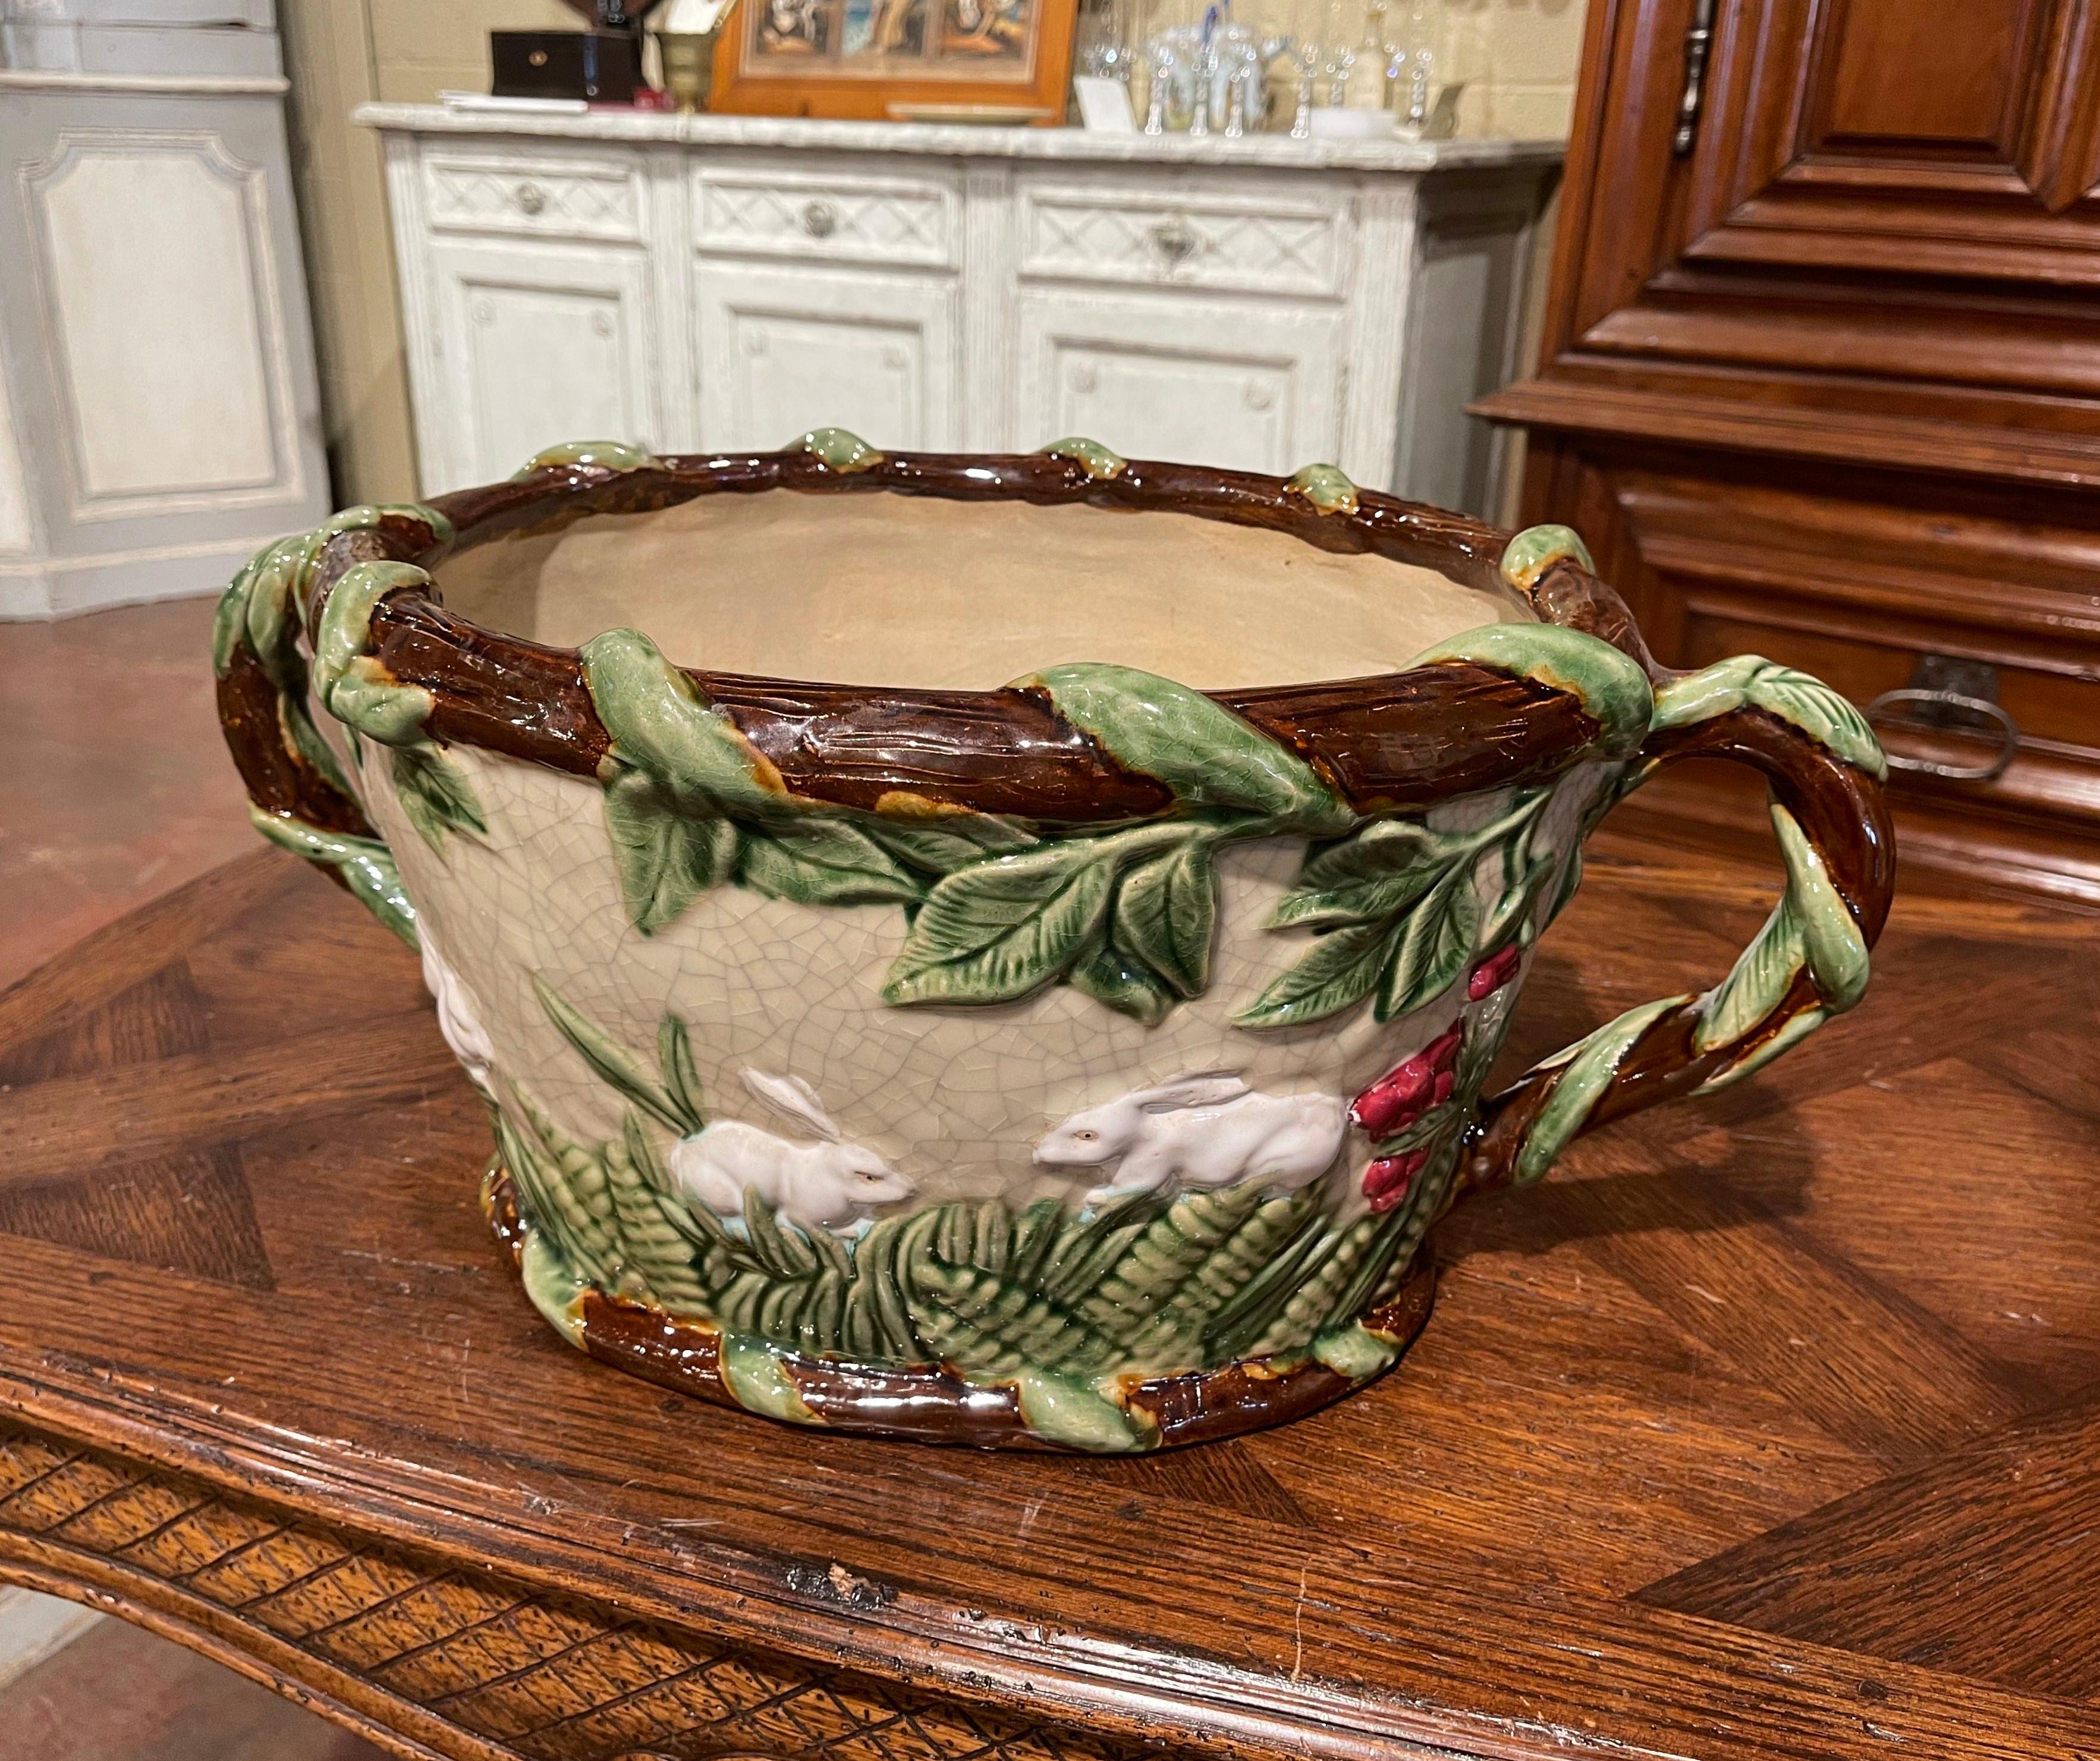 This colorful antique barbotine jardinière was sculpted in France circa 1960. Oval in shape with elegant twisted tree form handles, the antique porcelain cache pot features exquisitely rendered rabbit and foliage motifs in high relief. The large